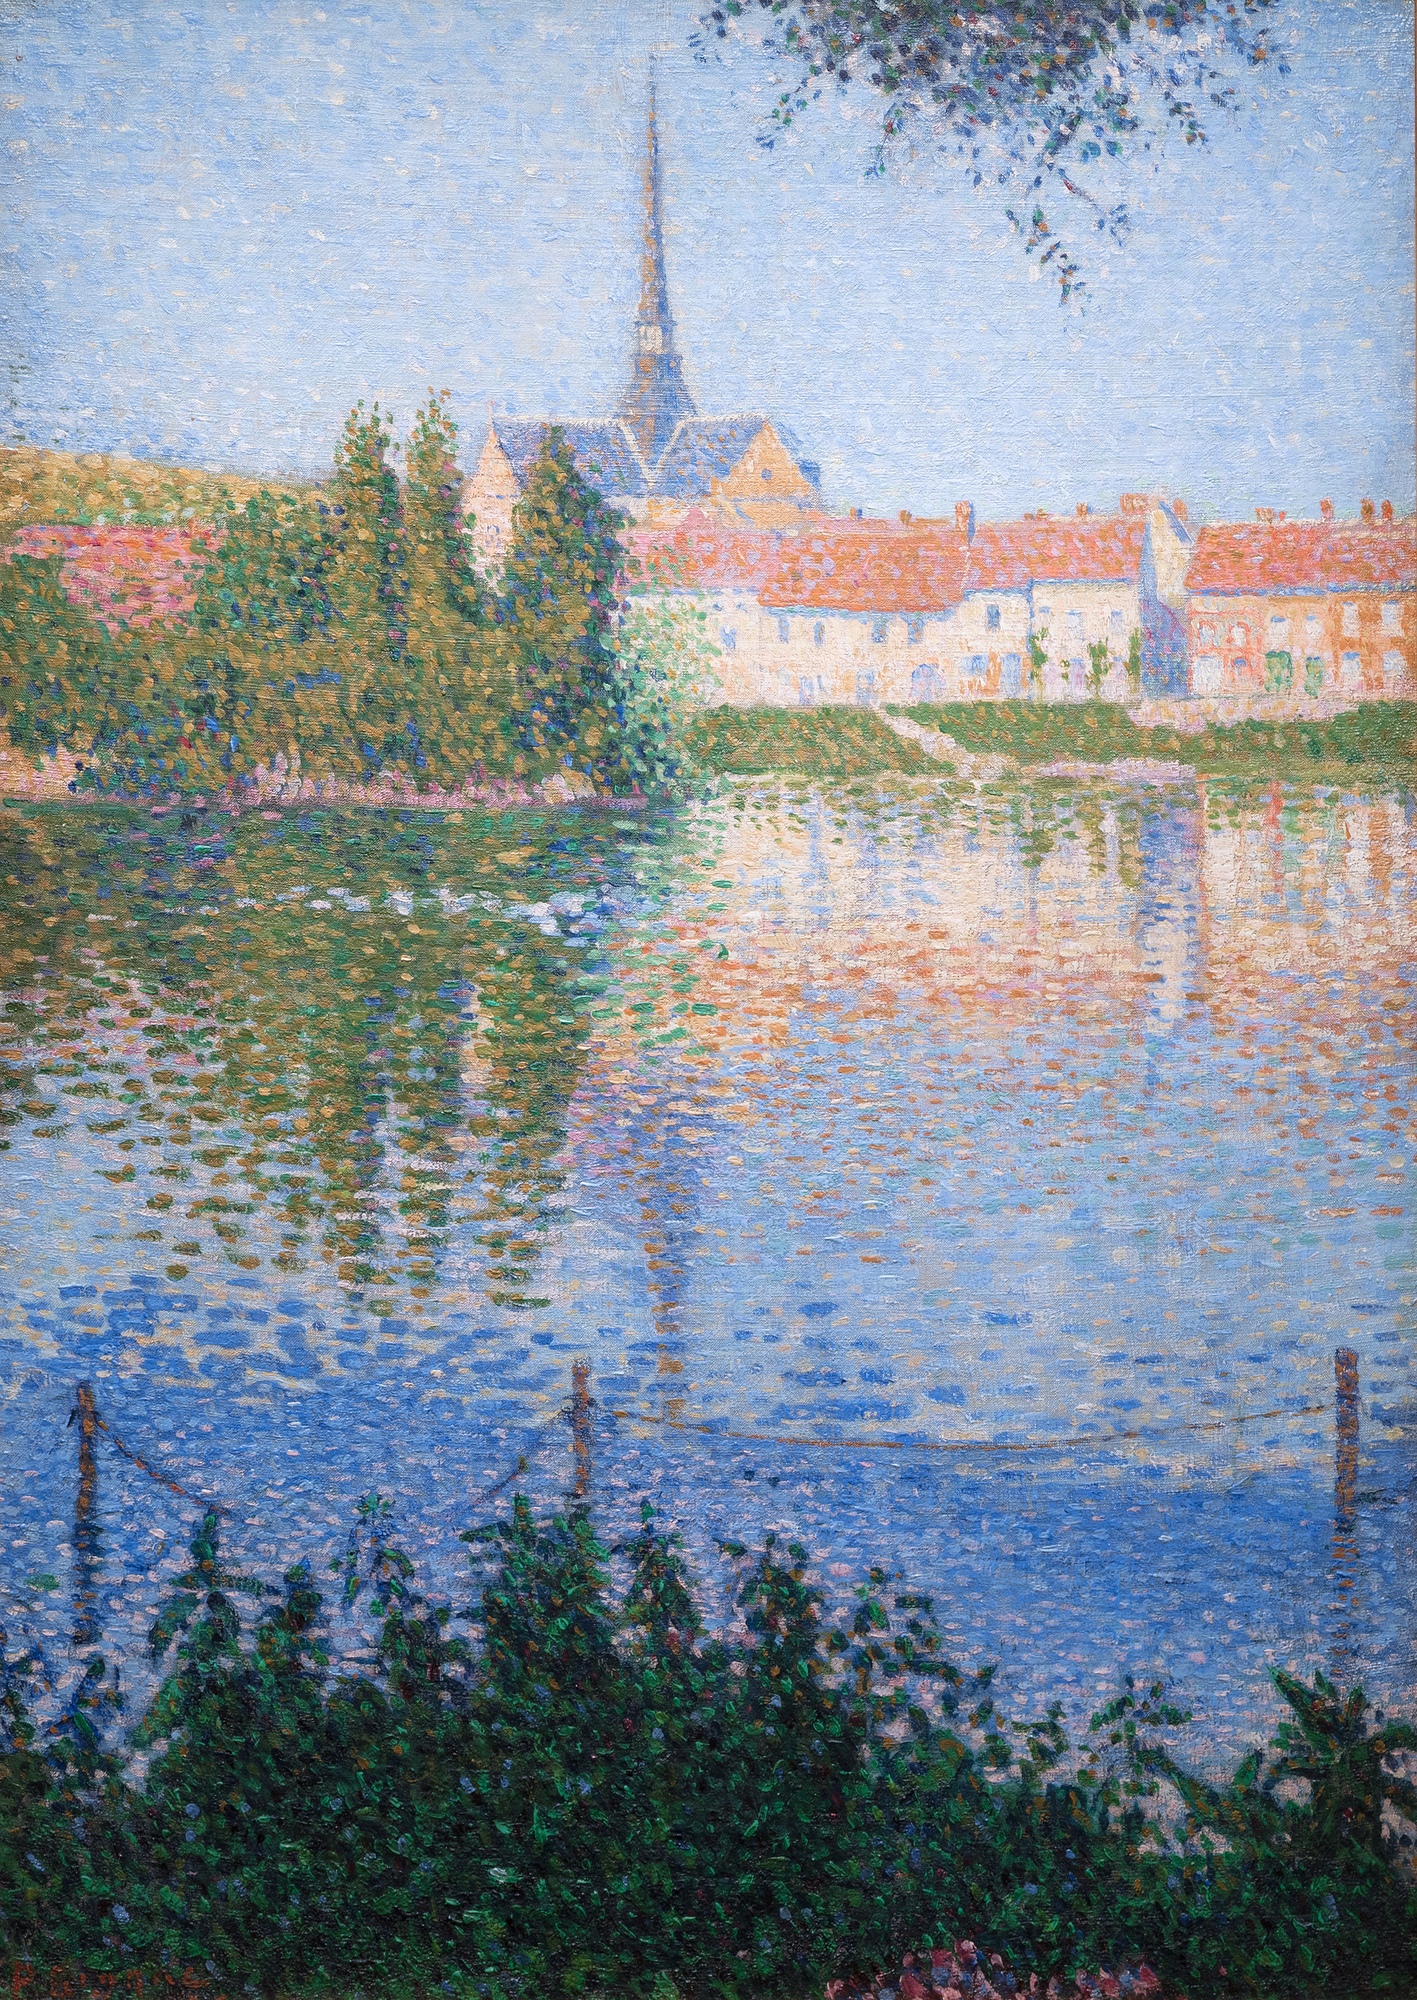 On May 15, 1886, a visual manifesto for a new art movement was born when Georges Seurat’s crowning achievement, A Sunday Afternoon on the Island of La Grande Jatte was unveiled at the Eighth Impressionist Exhibition. Seurat can claim title as the original “Scientific Impressionist” working in a manner that came to be known as Pointillism or Divisionism. It was, however, his friend and the confidant, 24-year-old Paul Signac and their constant dialogue that led to a collaboration in understanding the physics of light and color and the style that emerged. Signac was an untrained, yet a blazingly talented, Impressionist painter whose temperament was perfectly suited to the rigor and discipline required to achieve the painstakingly laborious brushwork and color. Signac quickly assimilated the technique. He also bore witness to Seurat’s arduous two-year journey building myriad layers of unblended dots of color on the colossally-sized La Grande Jatte. Together, Signac, the brash extrovert, and Seurat, a secretive introvert, were about to subvert the course of Impressionism, and change the course of modern art.